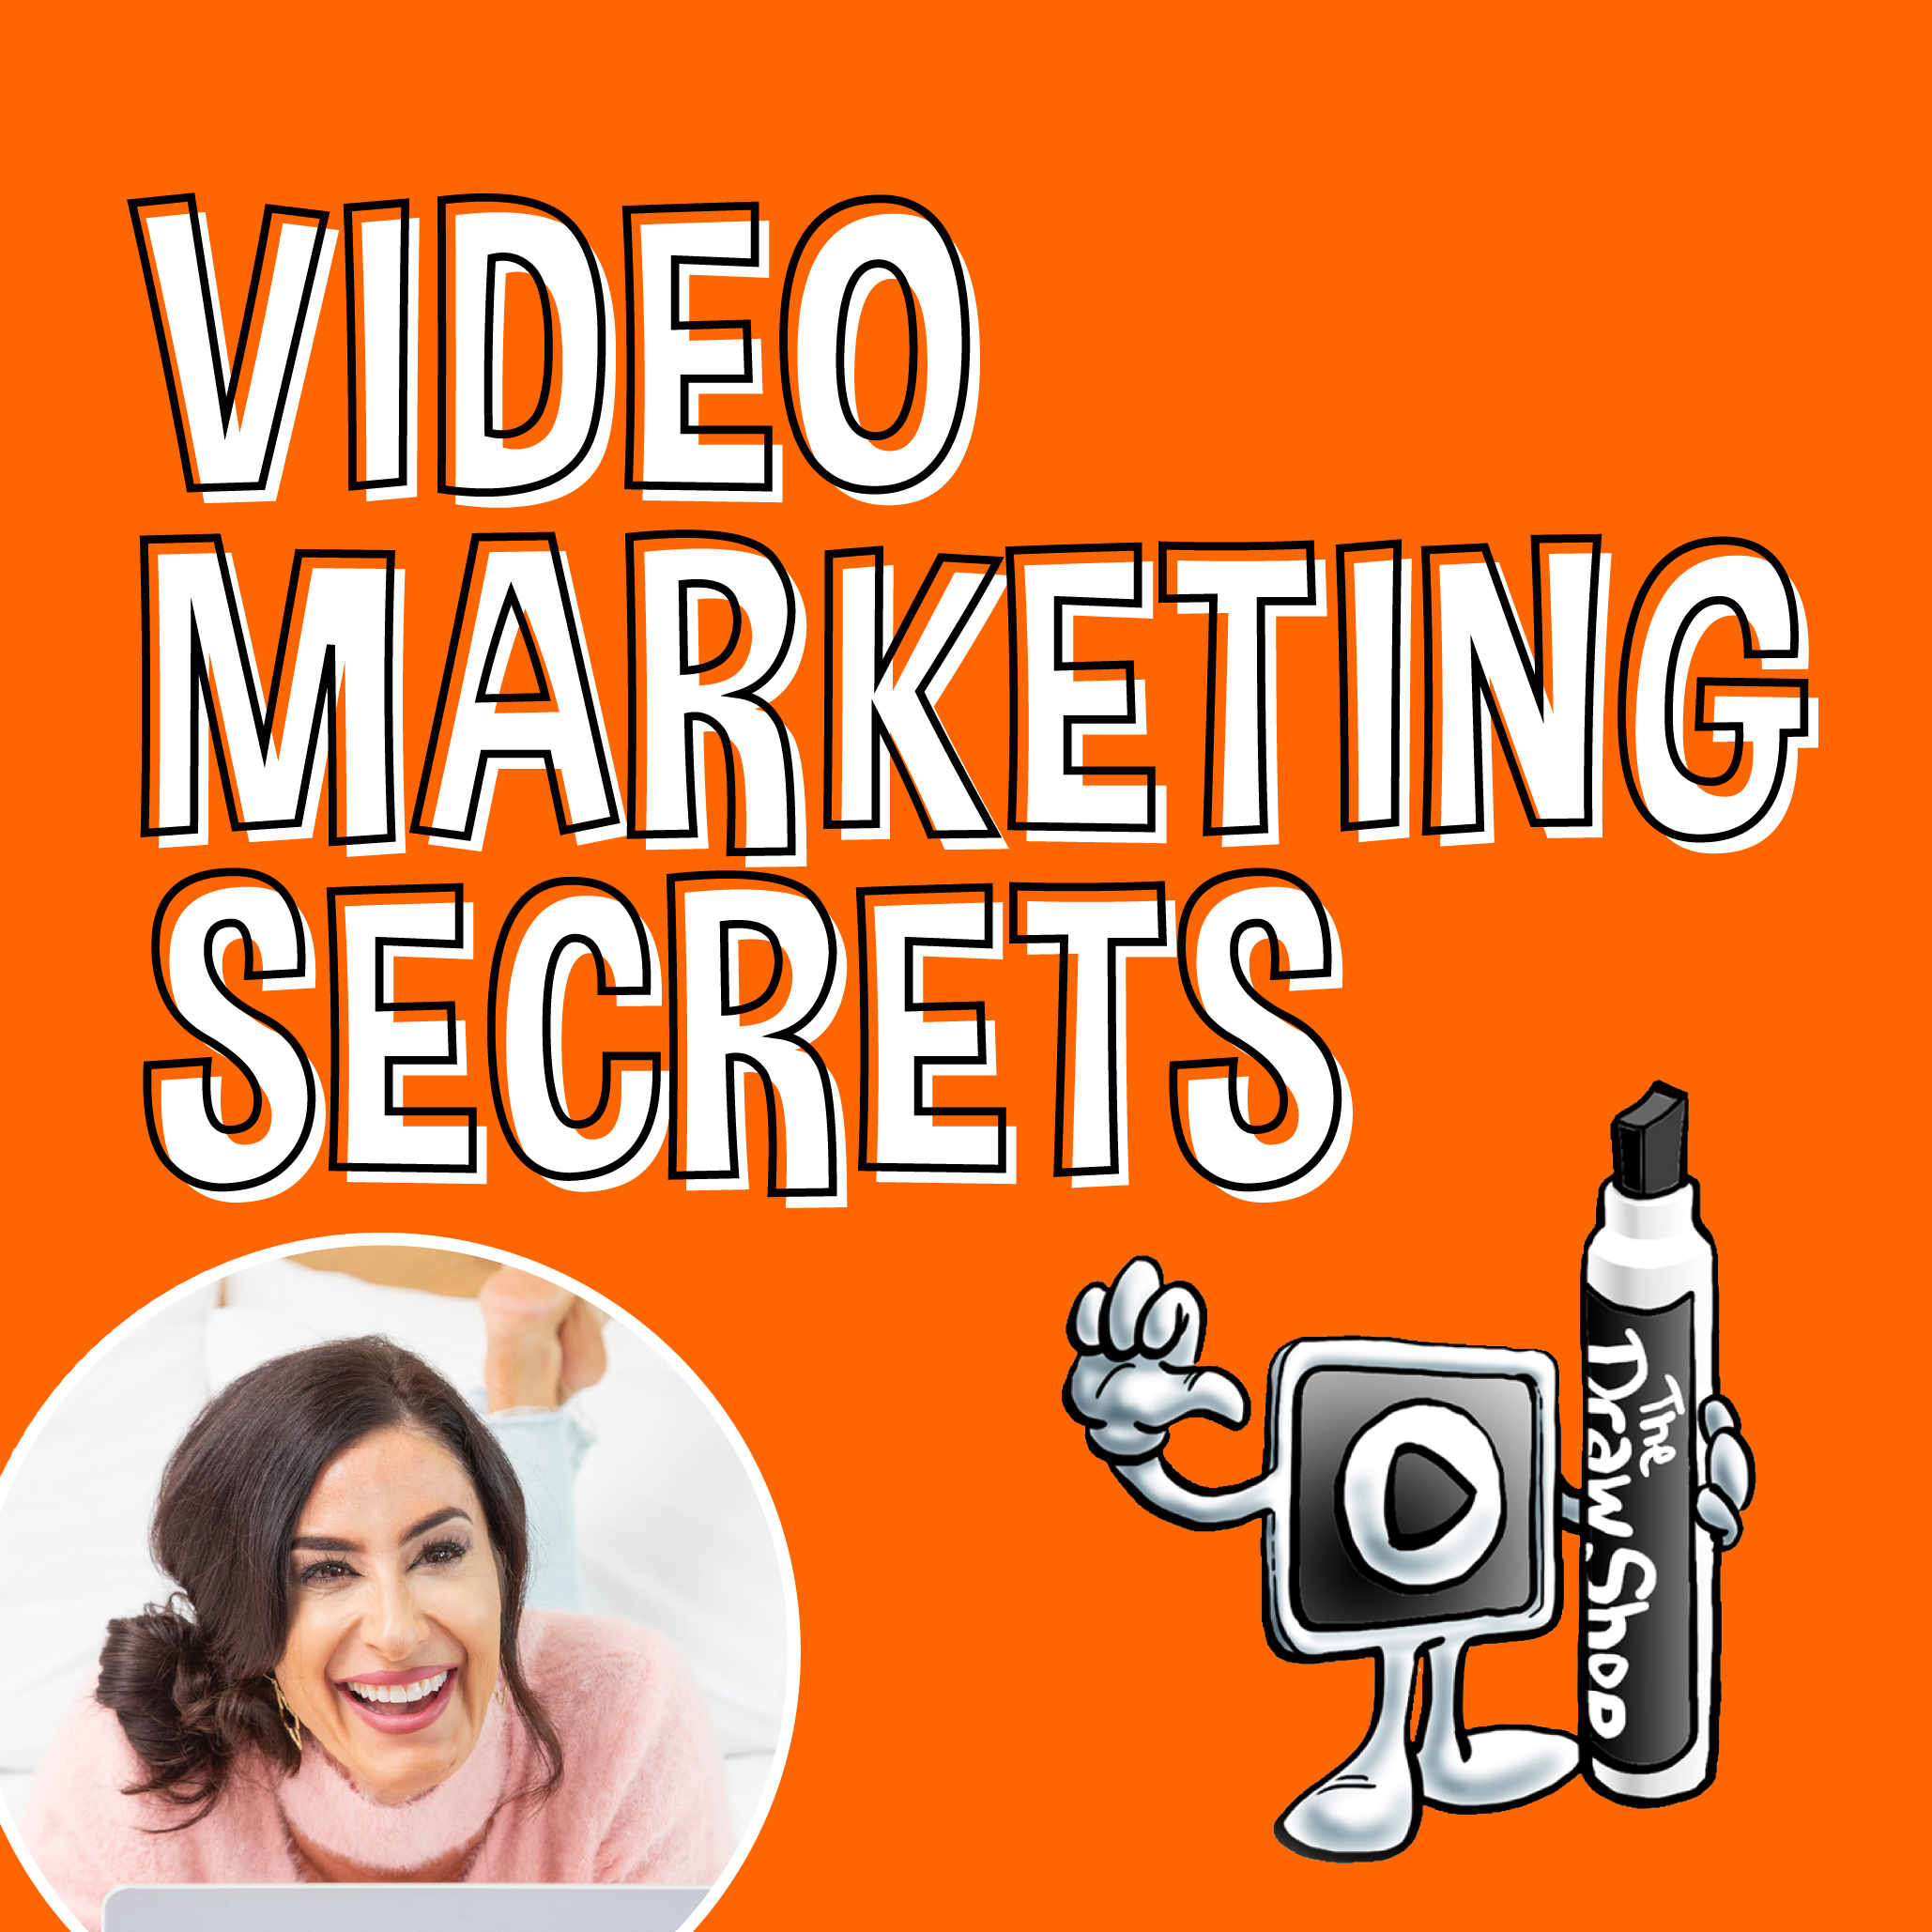 Want to Learn My Video Marketing Secrets? Listen Up! with Summer Felix-Mulder